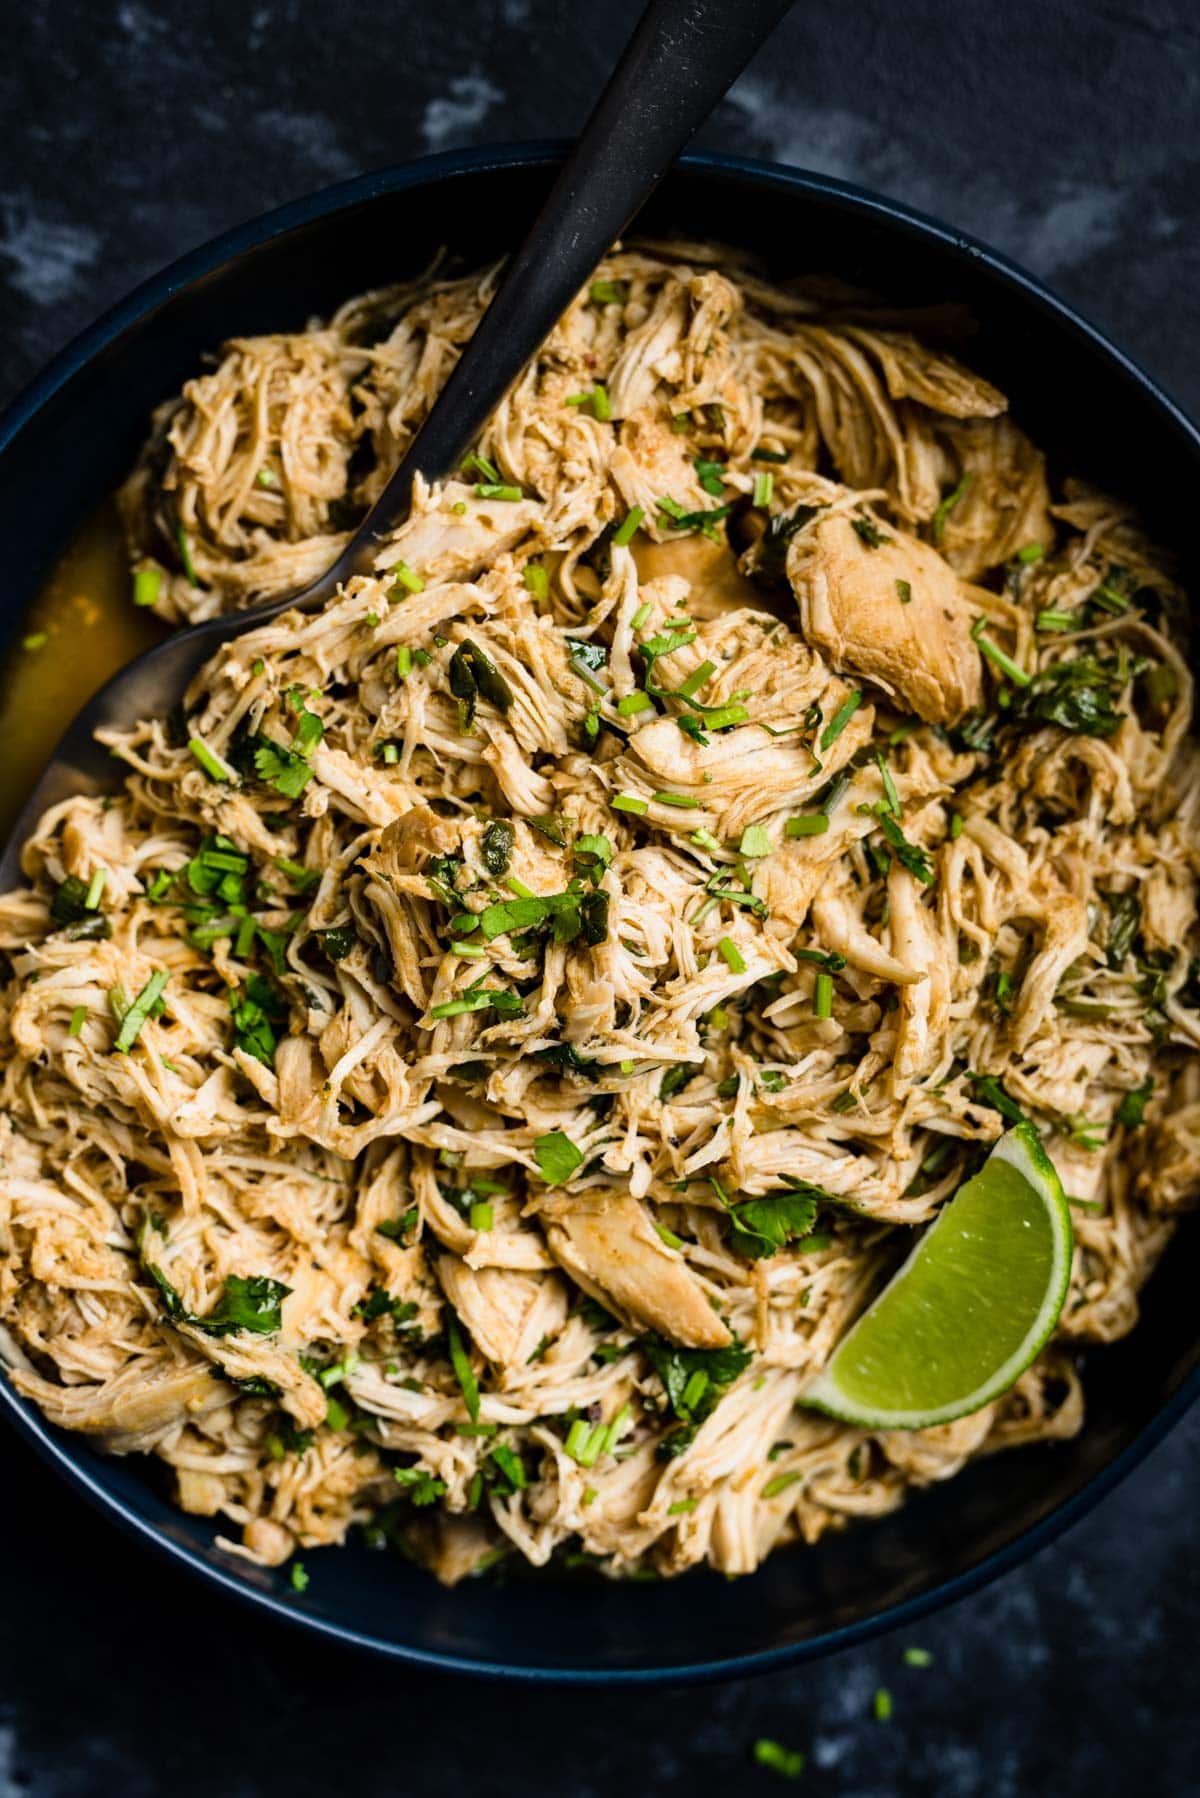 A serving spoon tucked into a bowl of shredded slow cooker cilantro lime chicken, garnished with a lime wedge and lots of fresh cilantro.